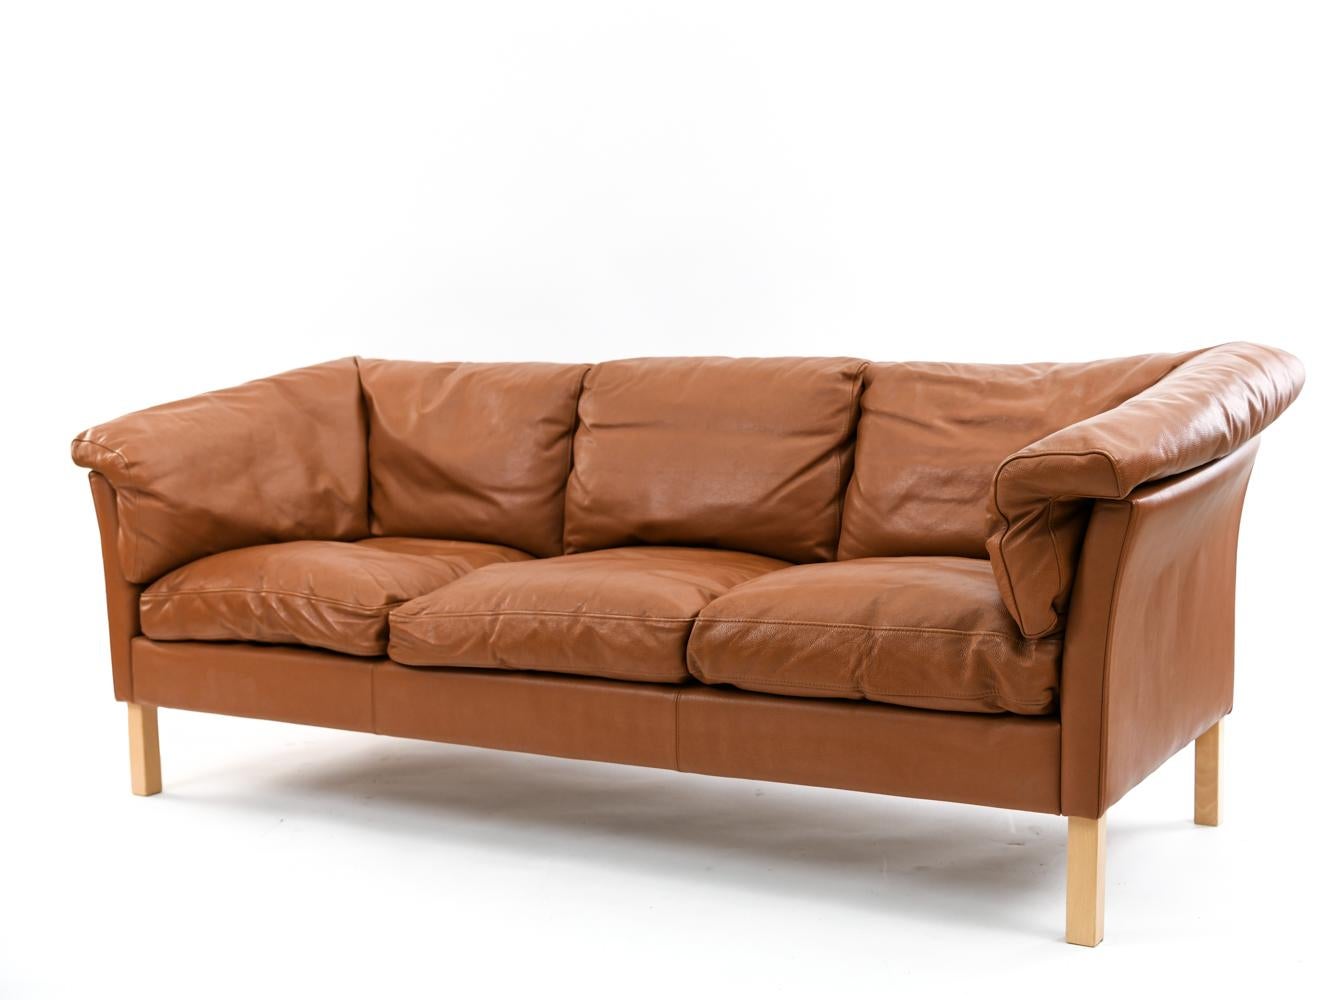 This Danish midcentury sofa suite by Mogens Hansen features a three-seat sofa and two-seat loveseat upholstered in soft, comfortable brandy colored leather. Use this set as a wonderful way to fill a space creating a cohesive, unified and modern